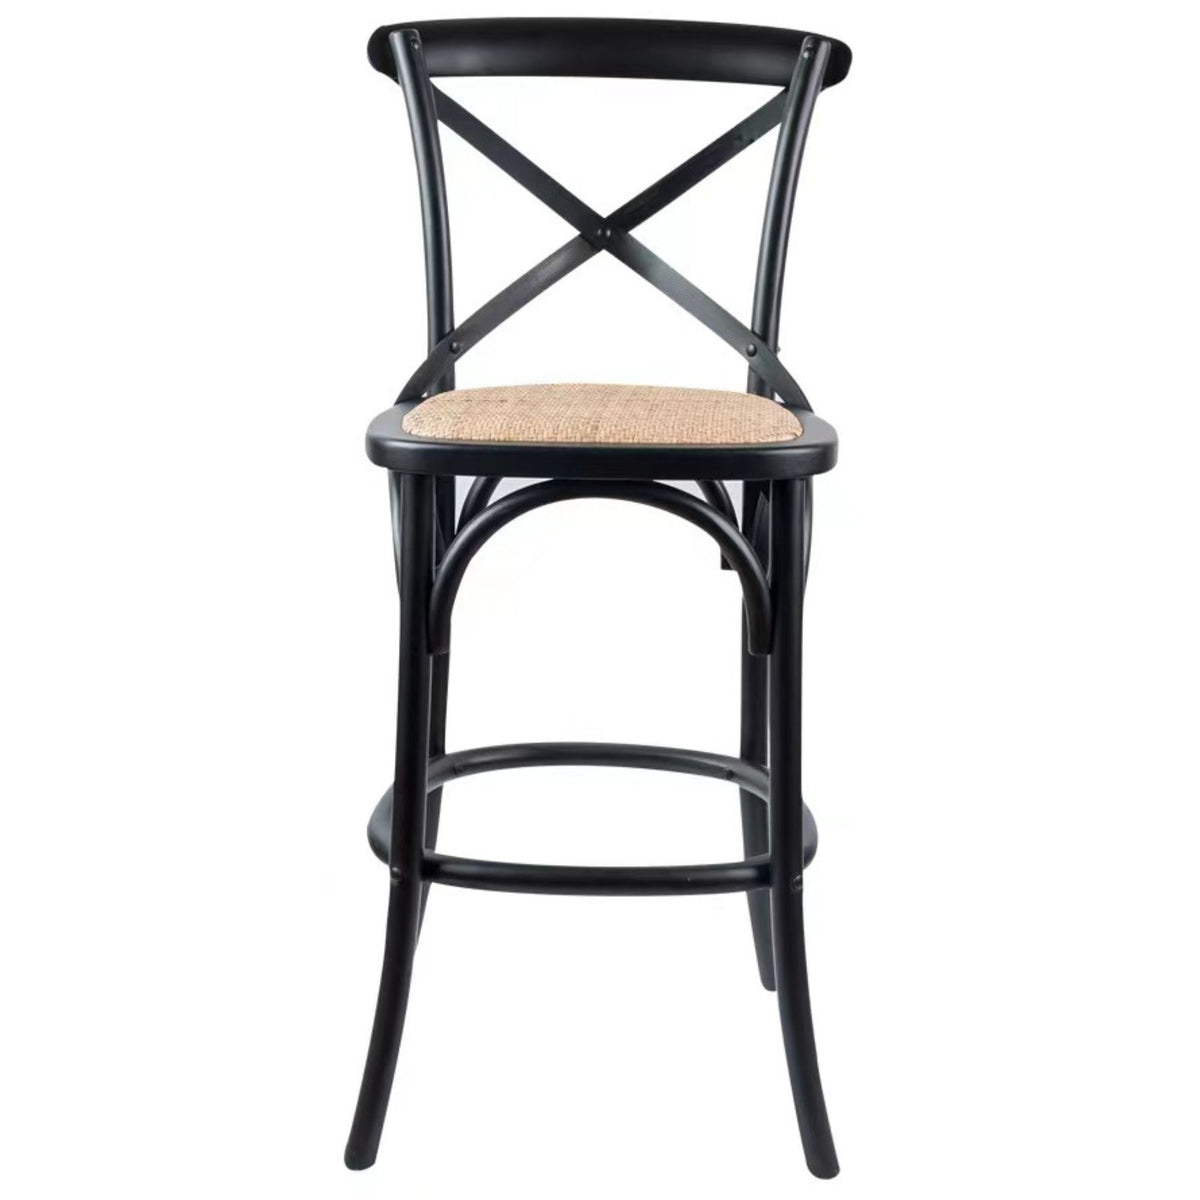 Aster Crossback Rattan Dining Bar Stools in Black Solid Birch Timber - Set of 2